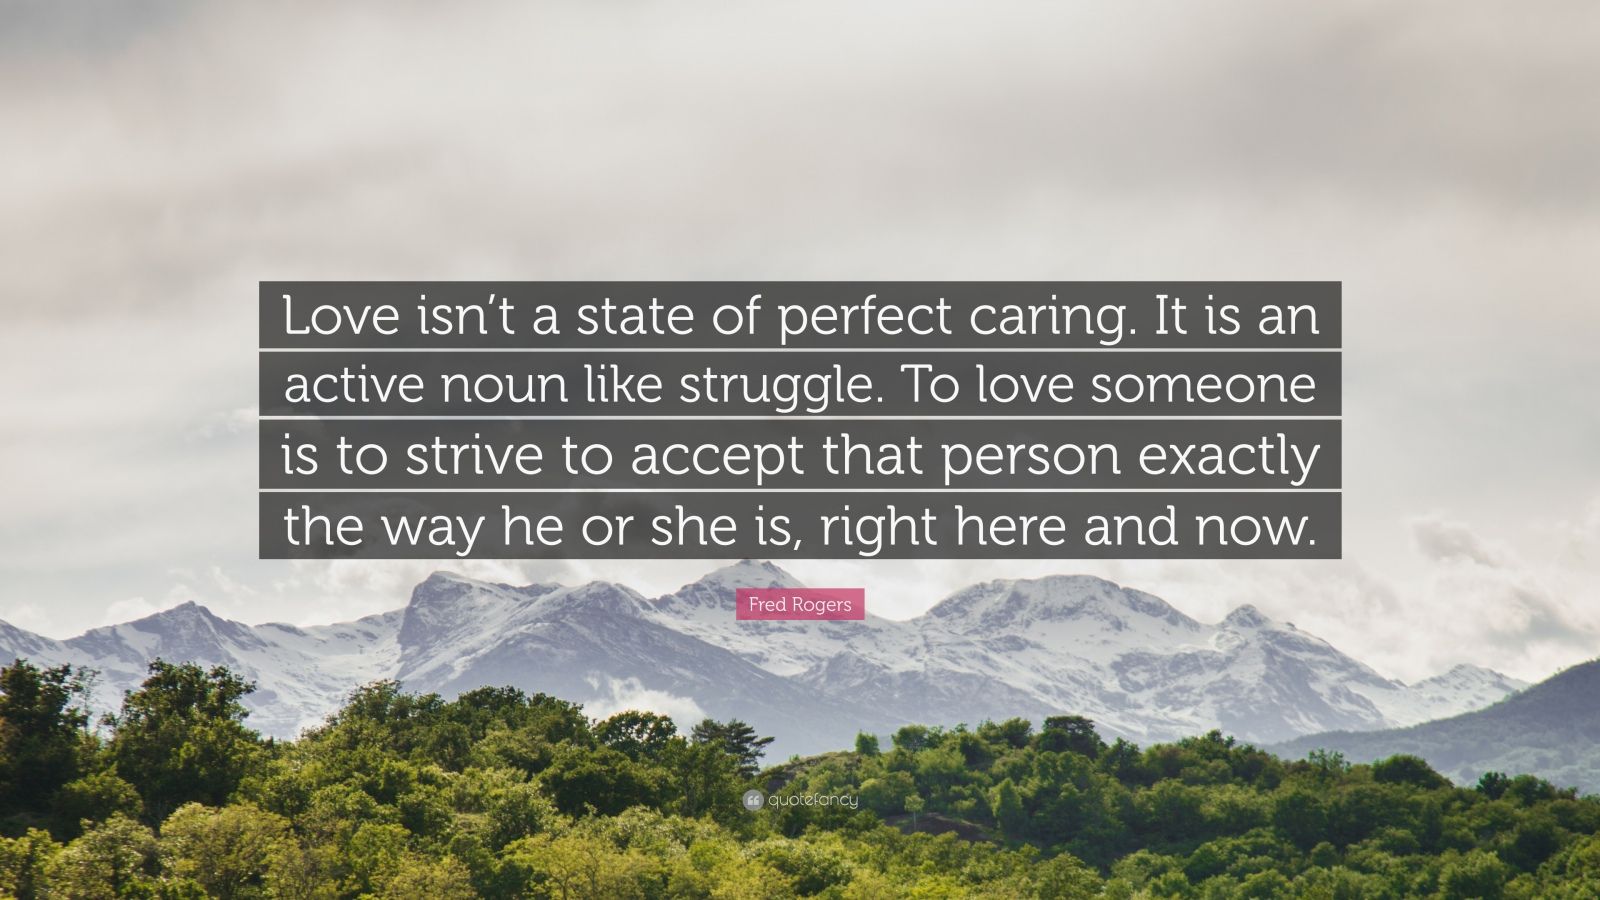 Fred Rogers Quote: “Love isn't a state of perfect caring. It is an active noun like struggle. To love someone is to strive to accept that pe.”